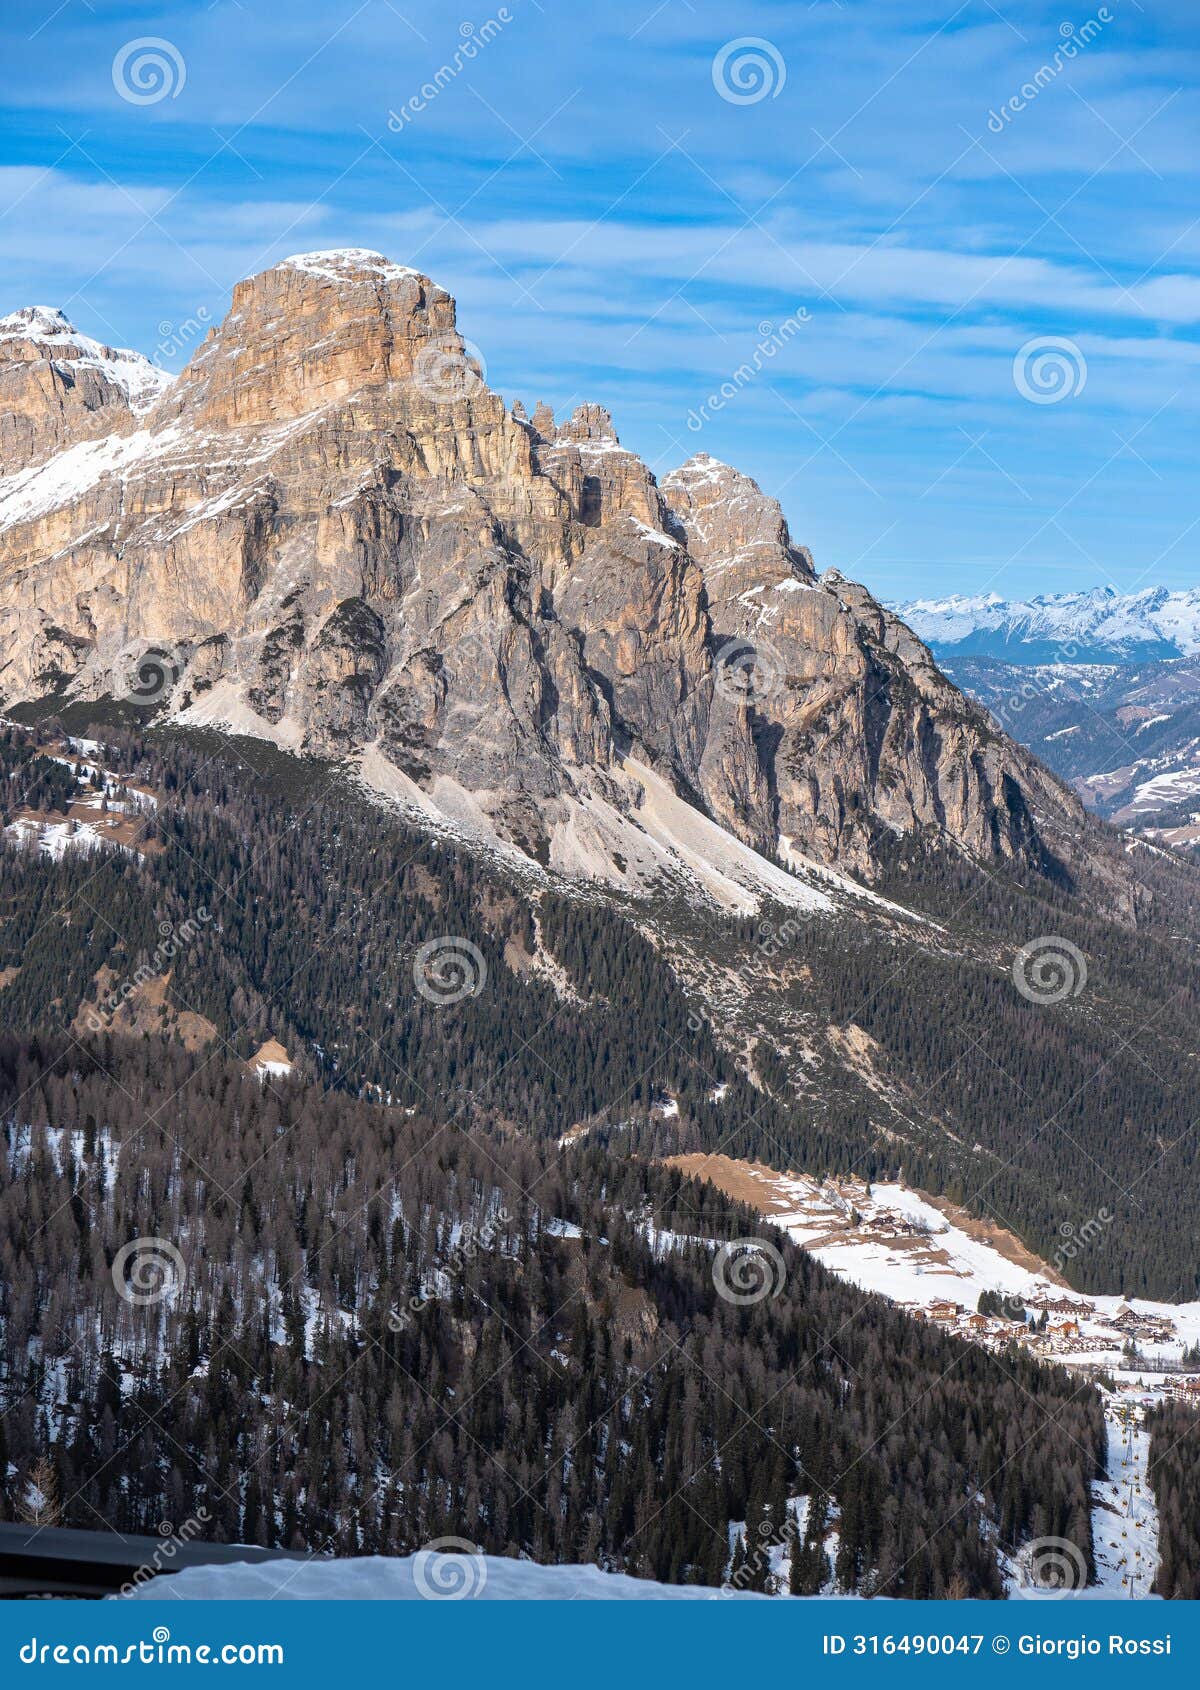 view of the panorama and the village of corvara from piz boe in the sella group, alps mountains, italy